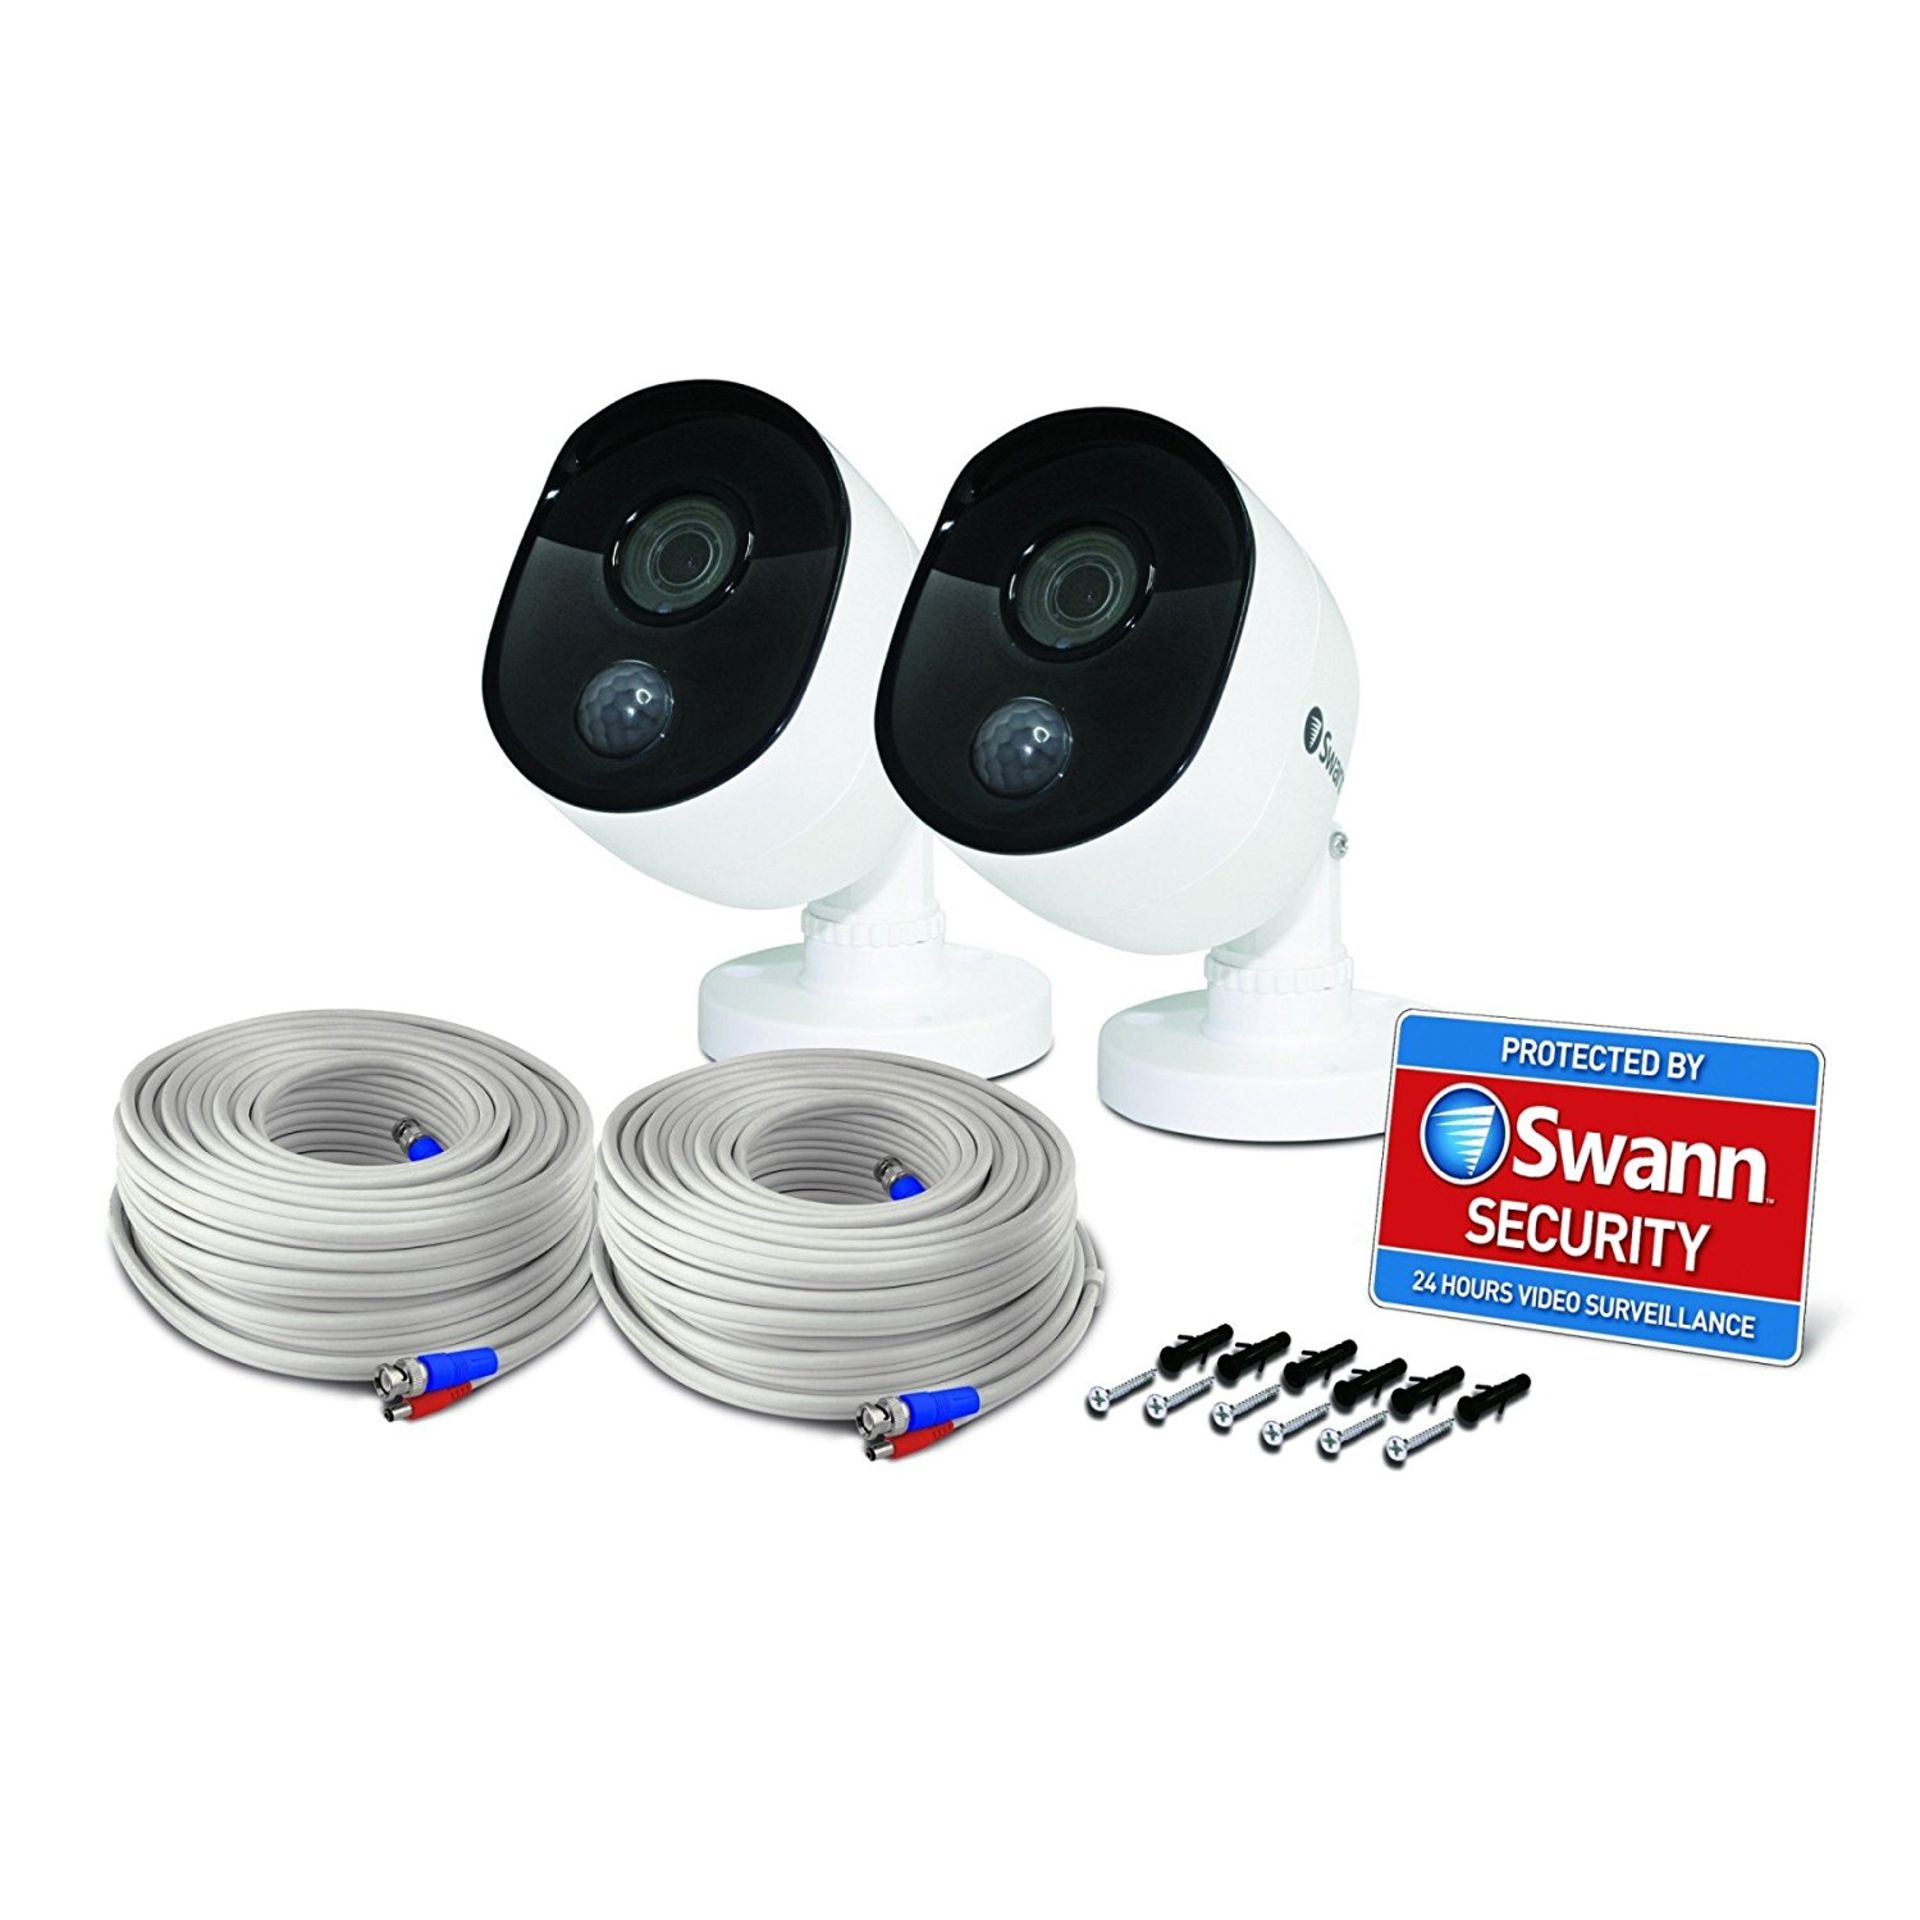 V *TRADE QTY* Grade A Swann W-SW-1080 MSB Pack Two Thermal Sensing Security Cameras X 3 YOUR BID